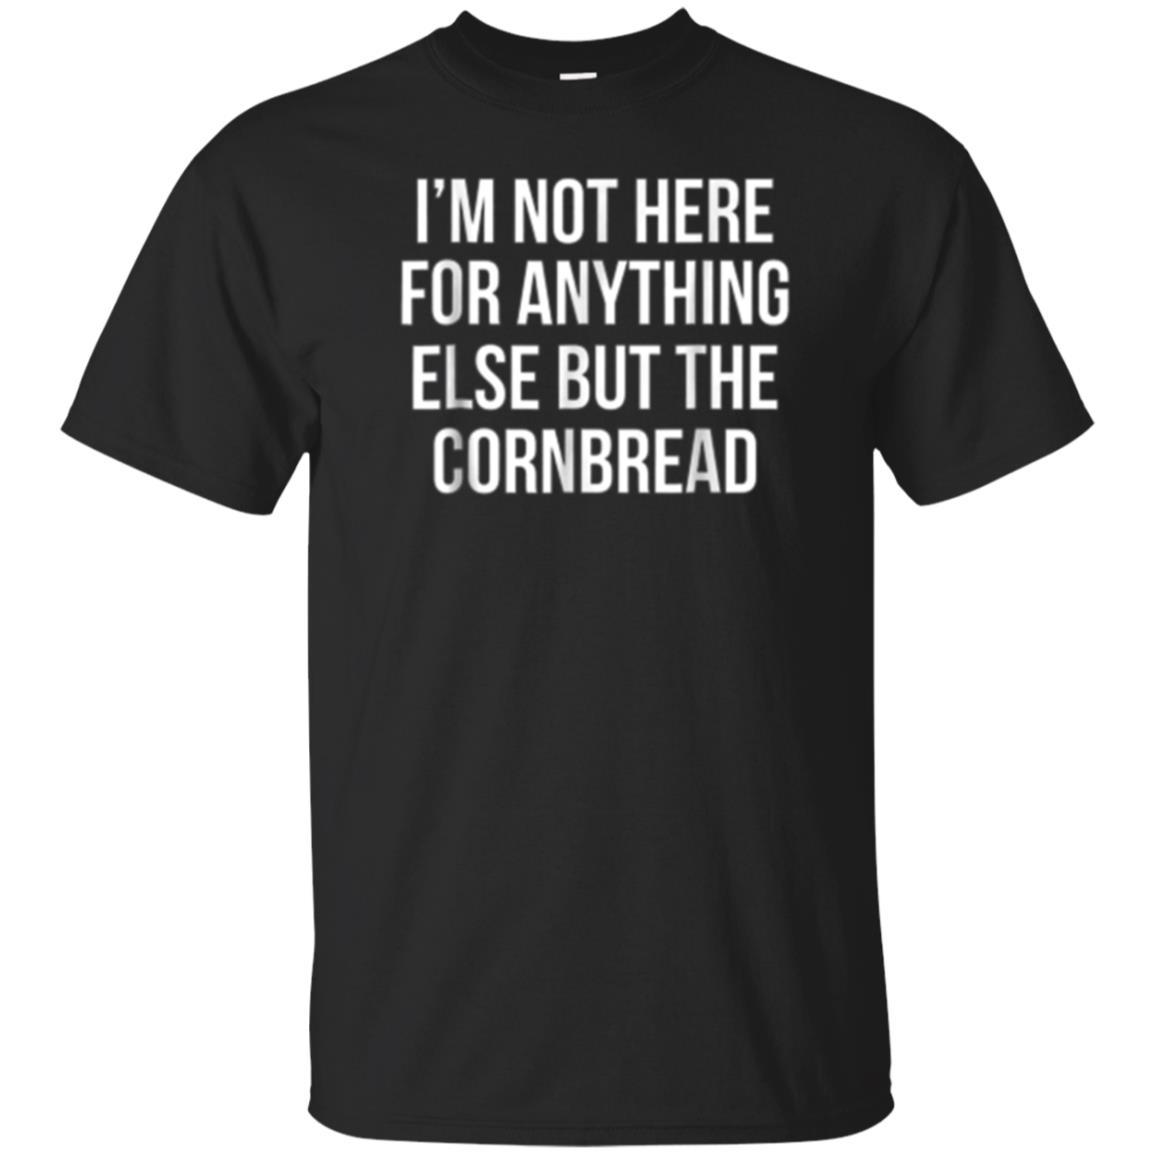 Find Here For Cornbread T-shirt Funny Thanksgiving Shirt